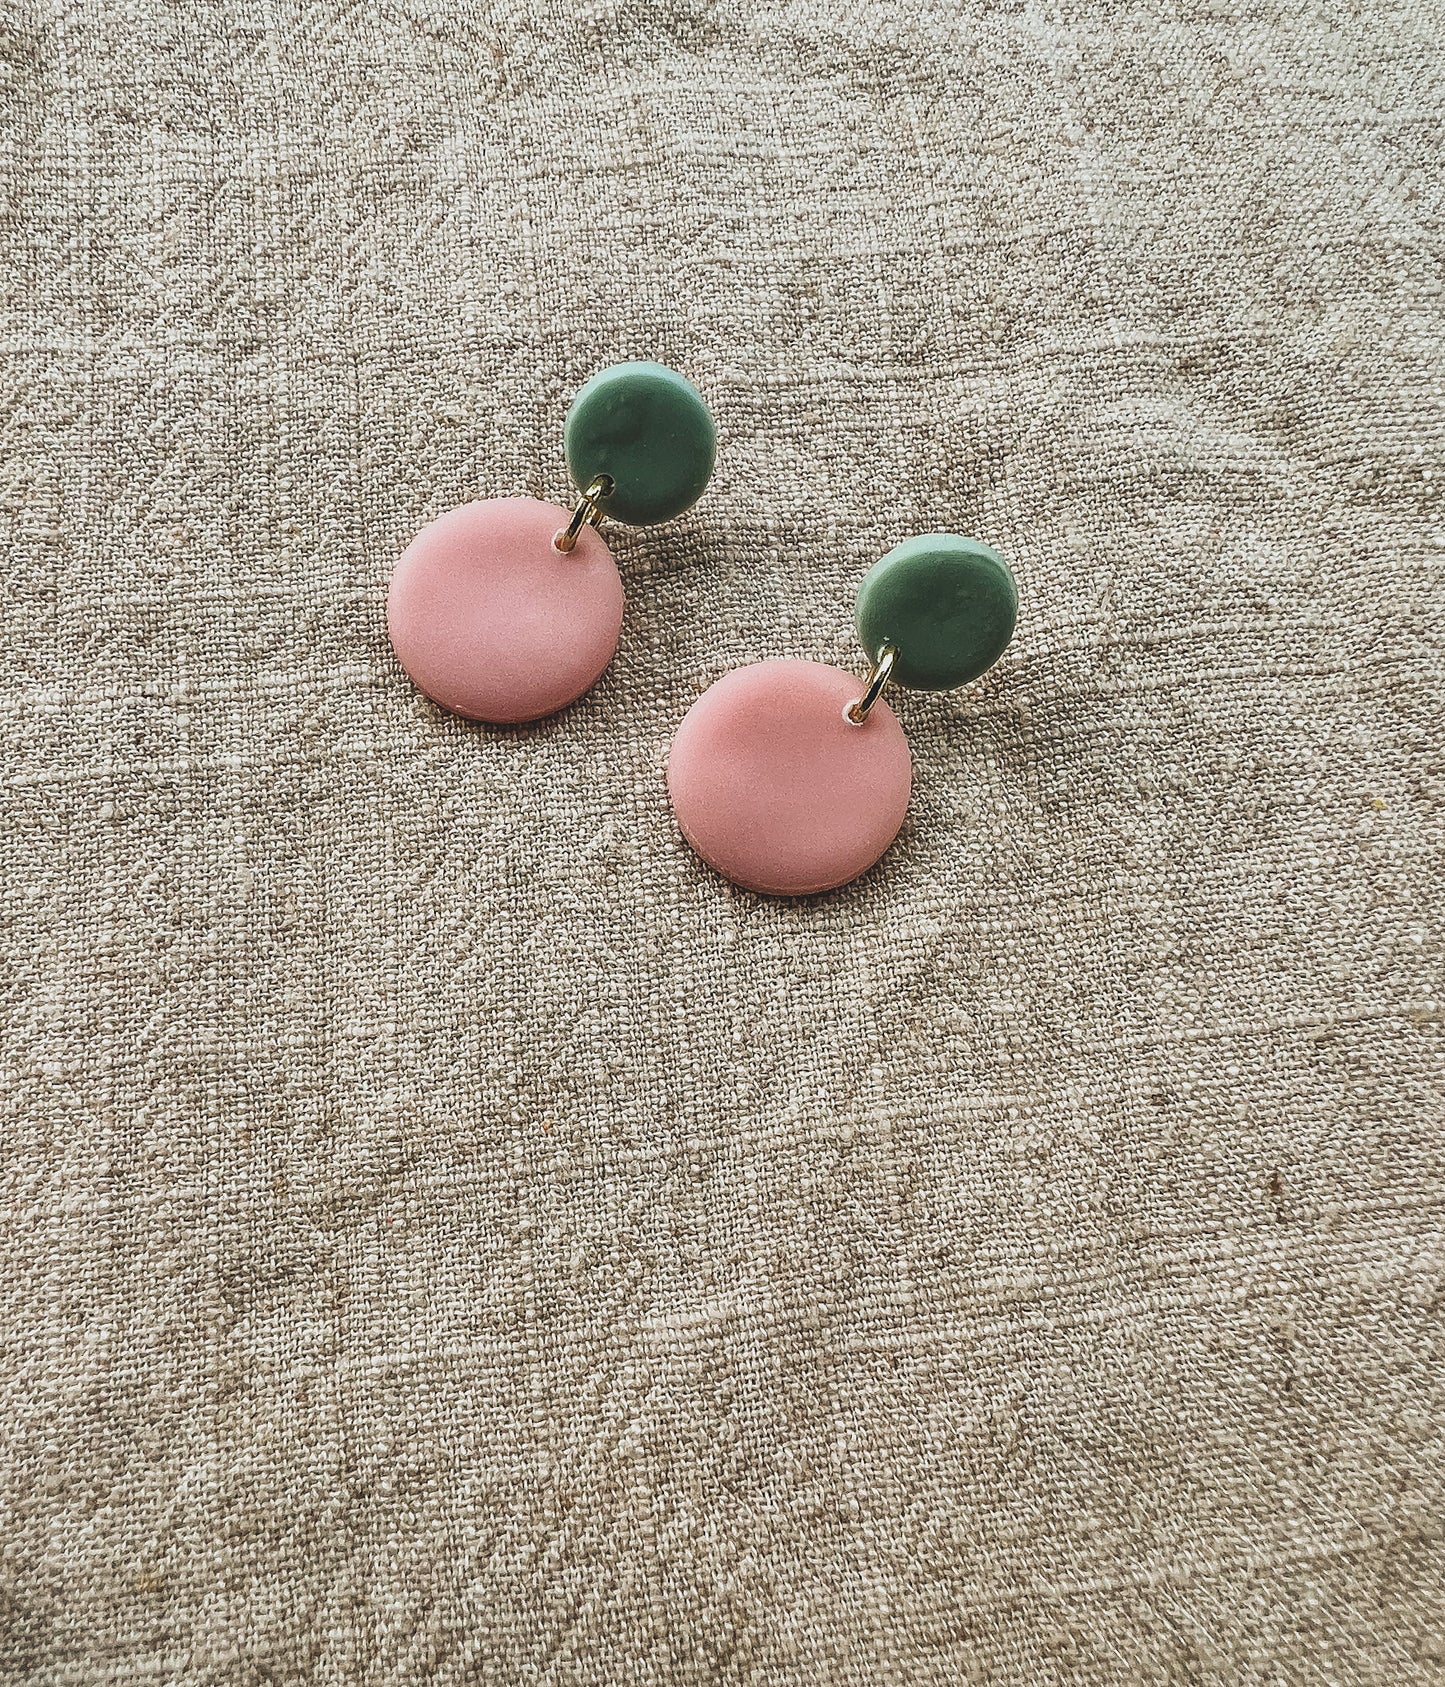 Cotton Candy Dainty Dangles